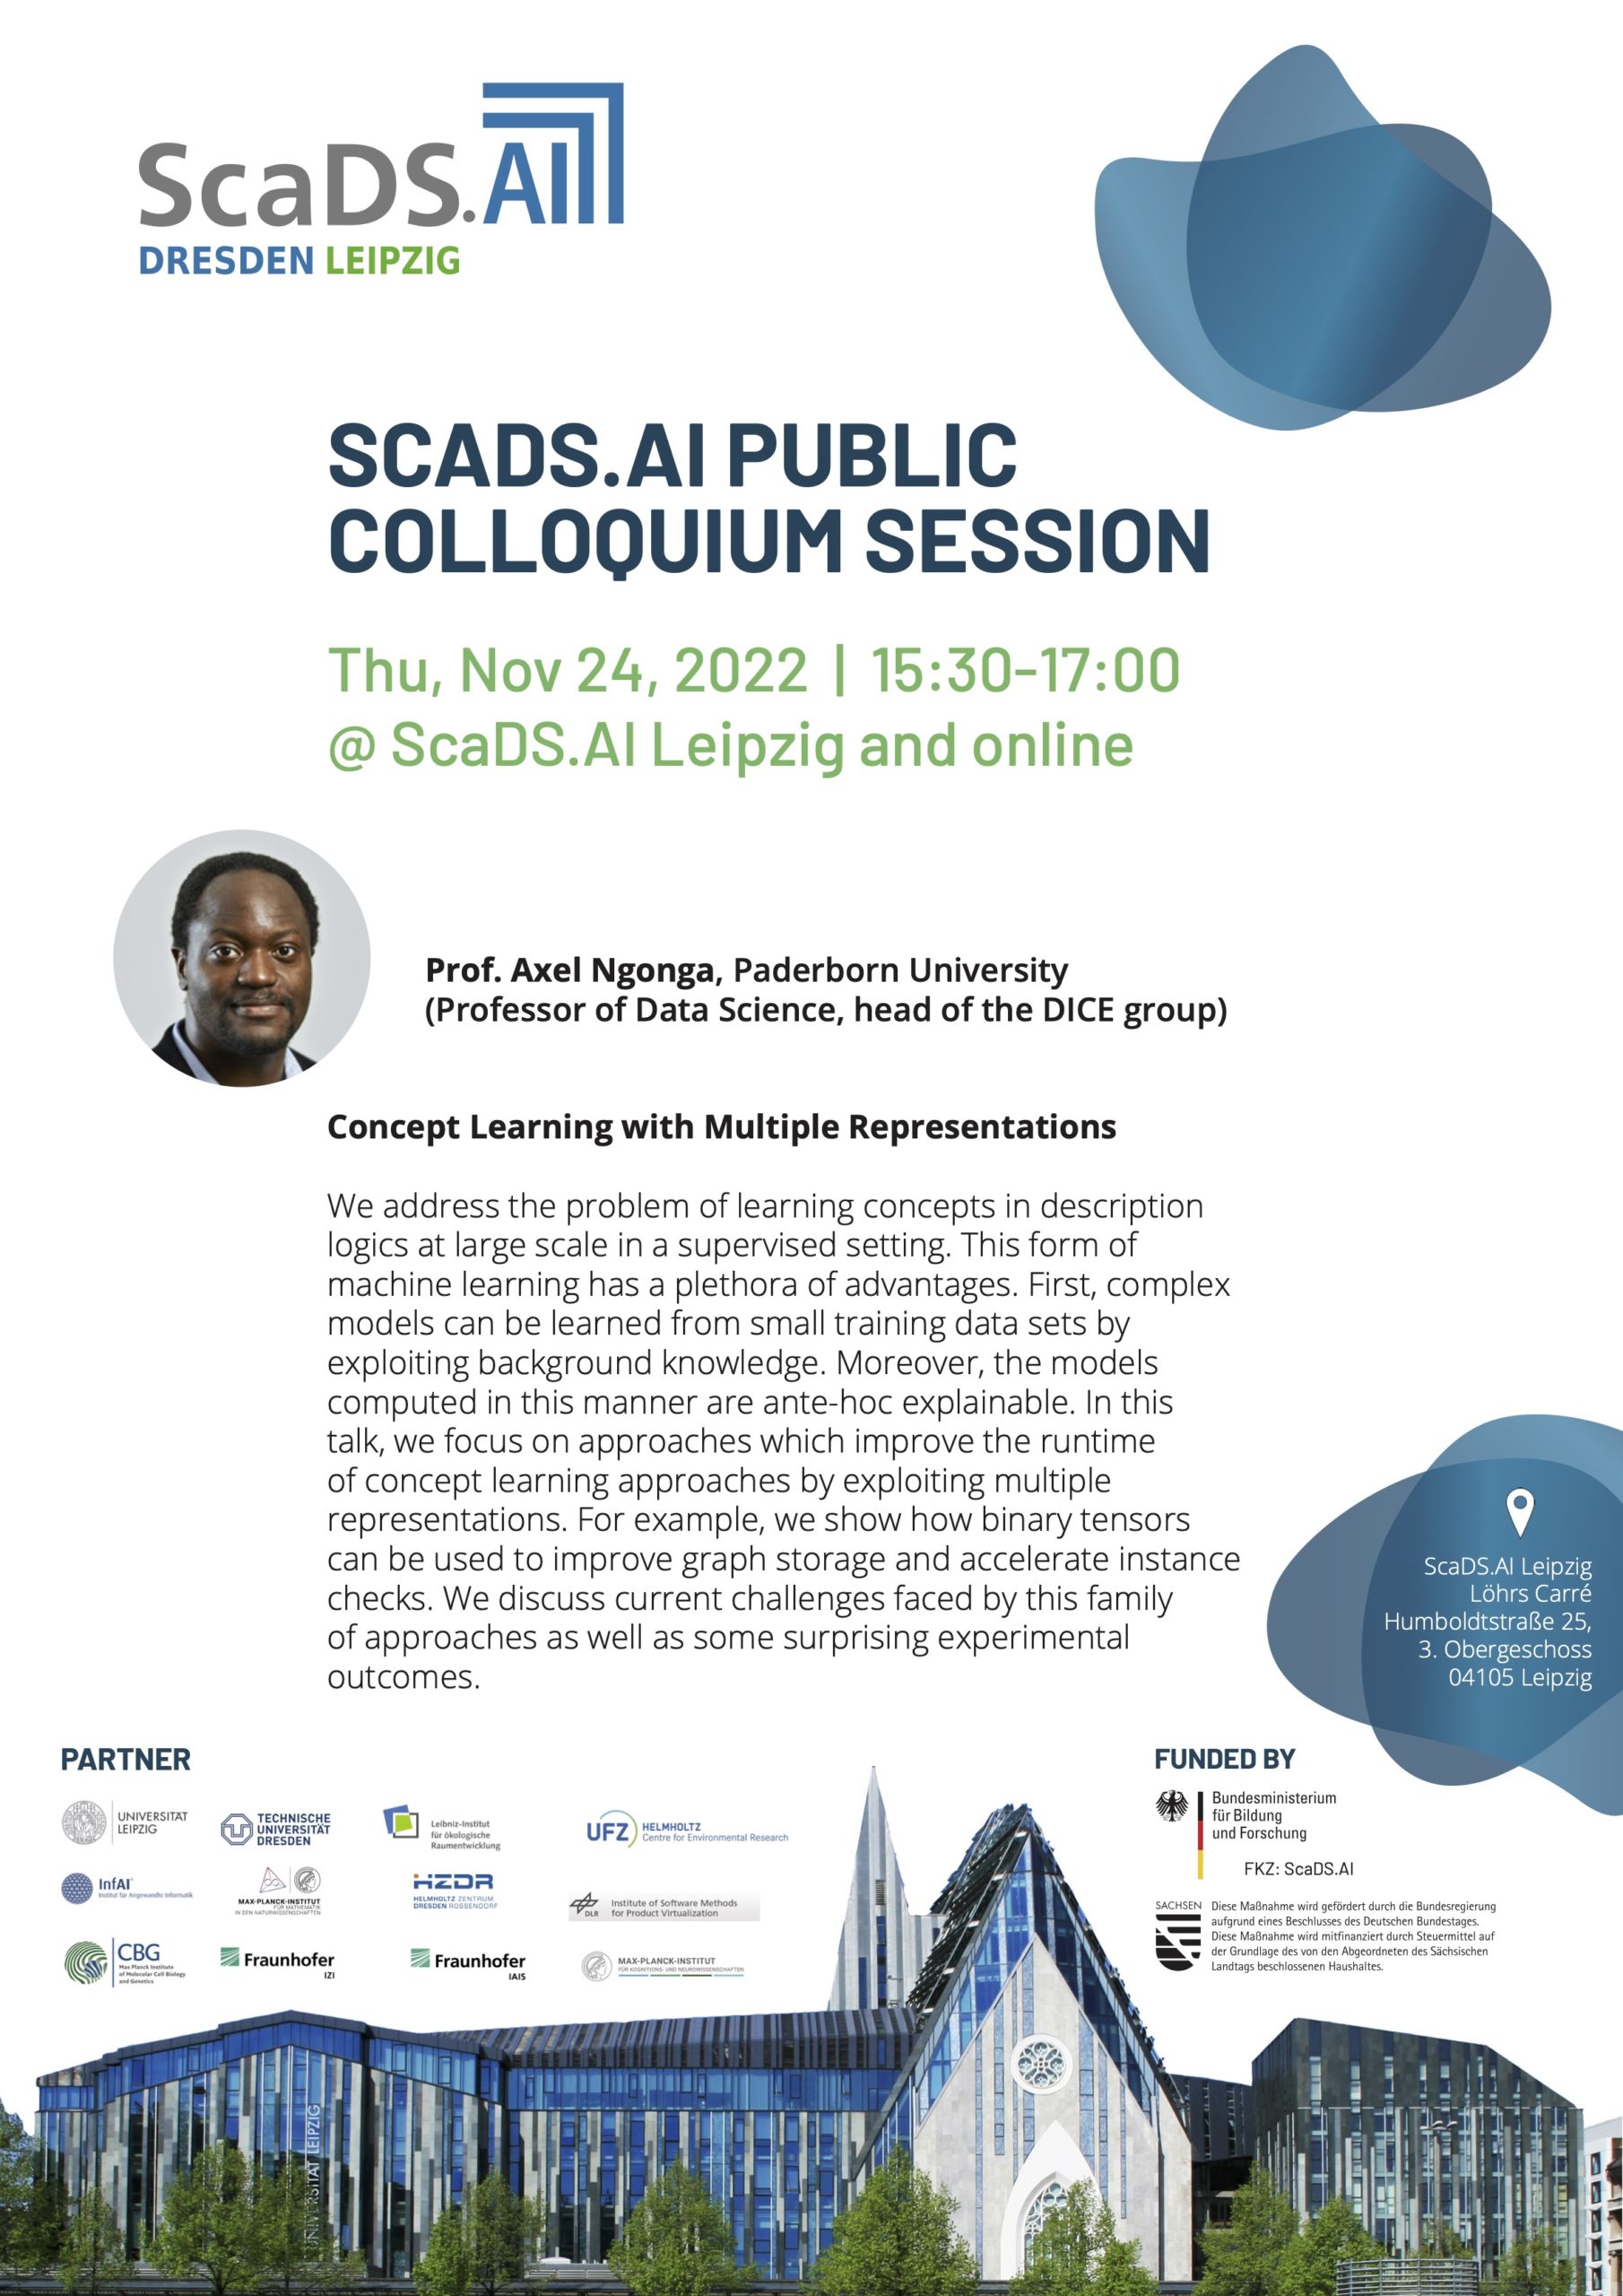 ScaDS.AI Public Colloquium session 
Thu, Nov 24, 2022, 10:30 - 17:00 @ ScaDS.AI Leipzig and online

Prof. Axel Ngonga - Concept Learning with Multiple Representations